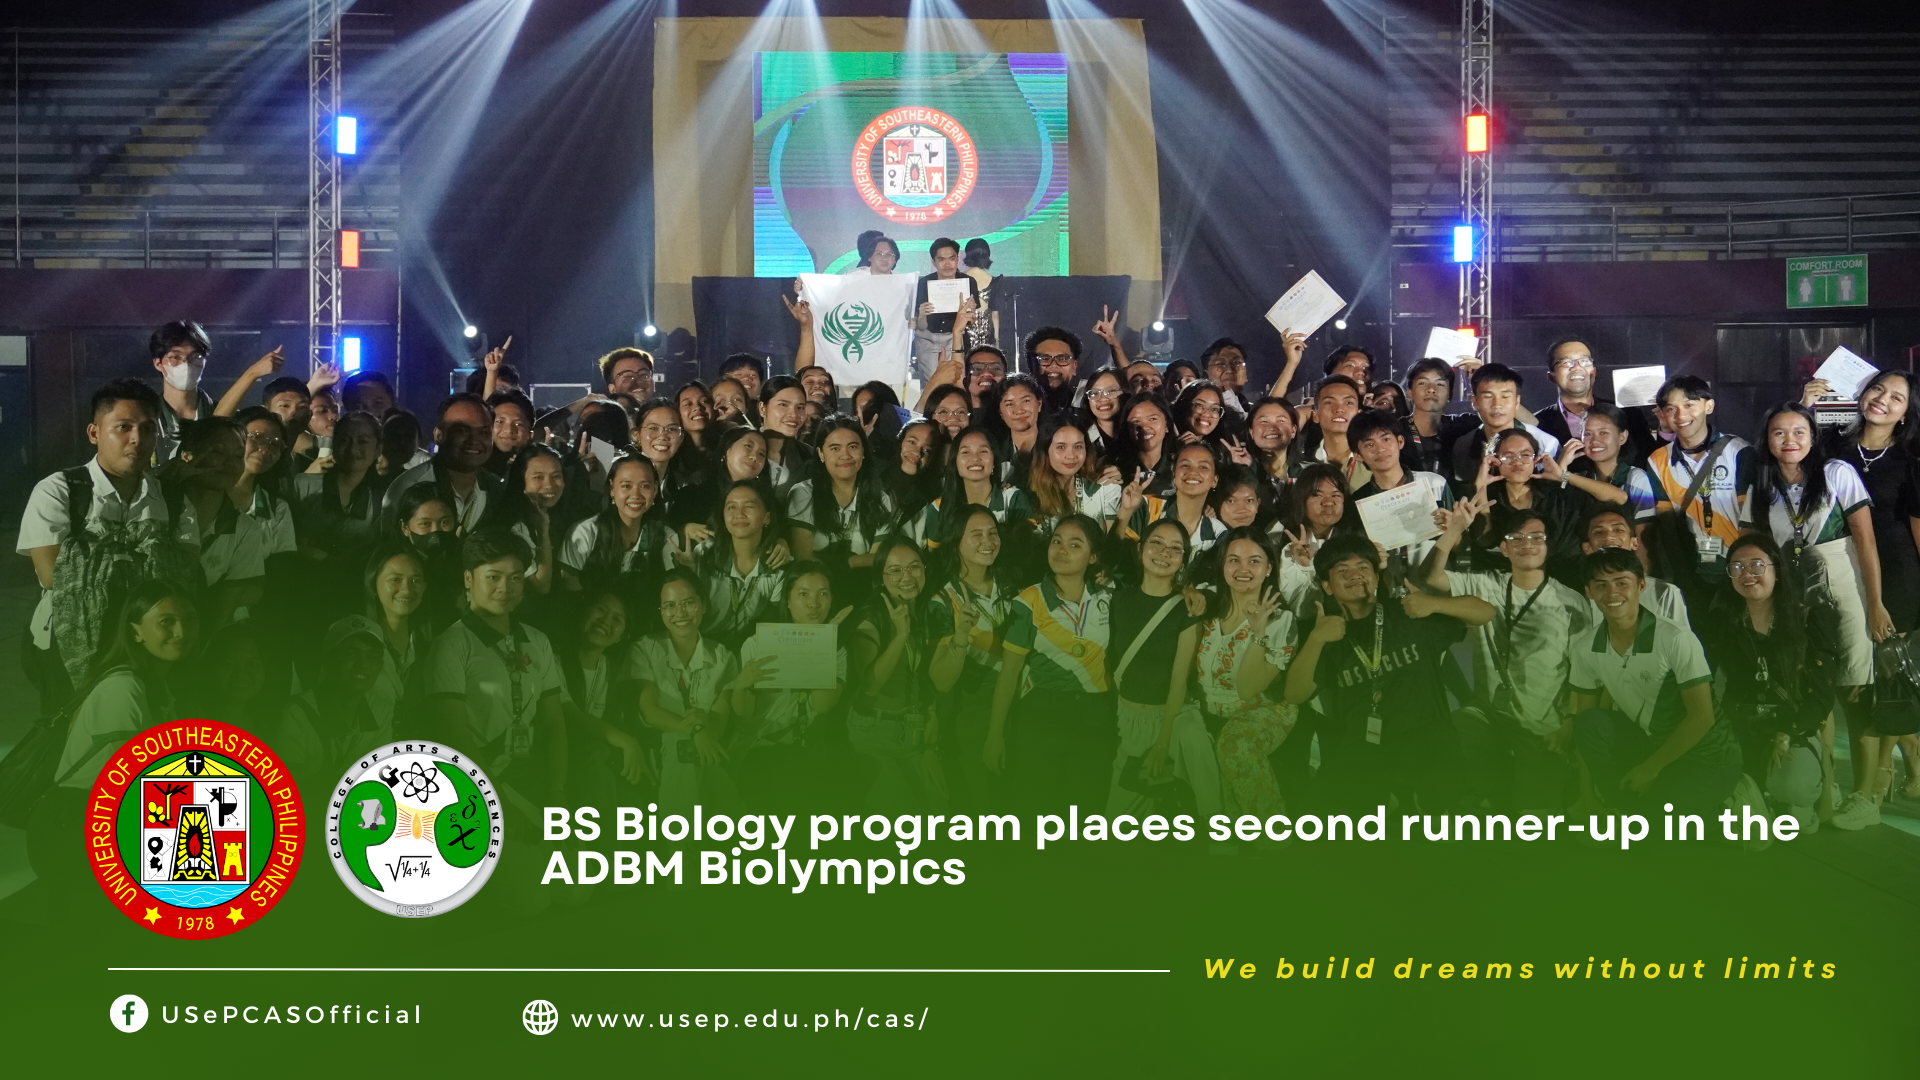 BS Biology program places second runner-up in the ADBM Biolympics